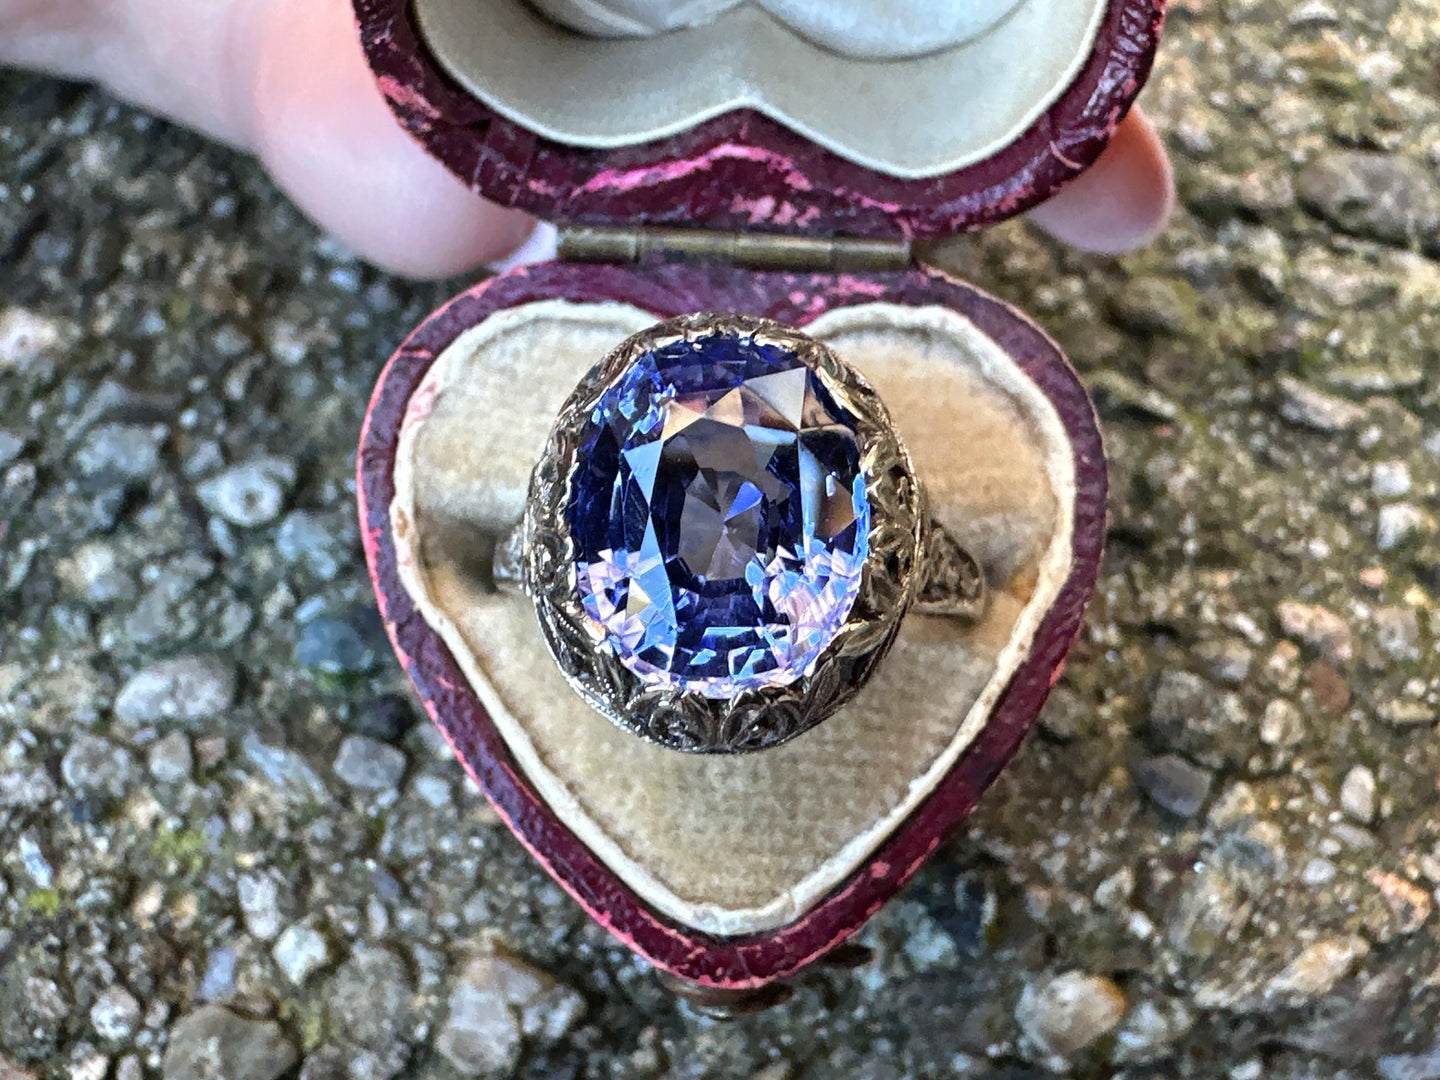 ANTIQUE SAPPHIRE FILIGREE RING IN 18KT WHITE GOLD